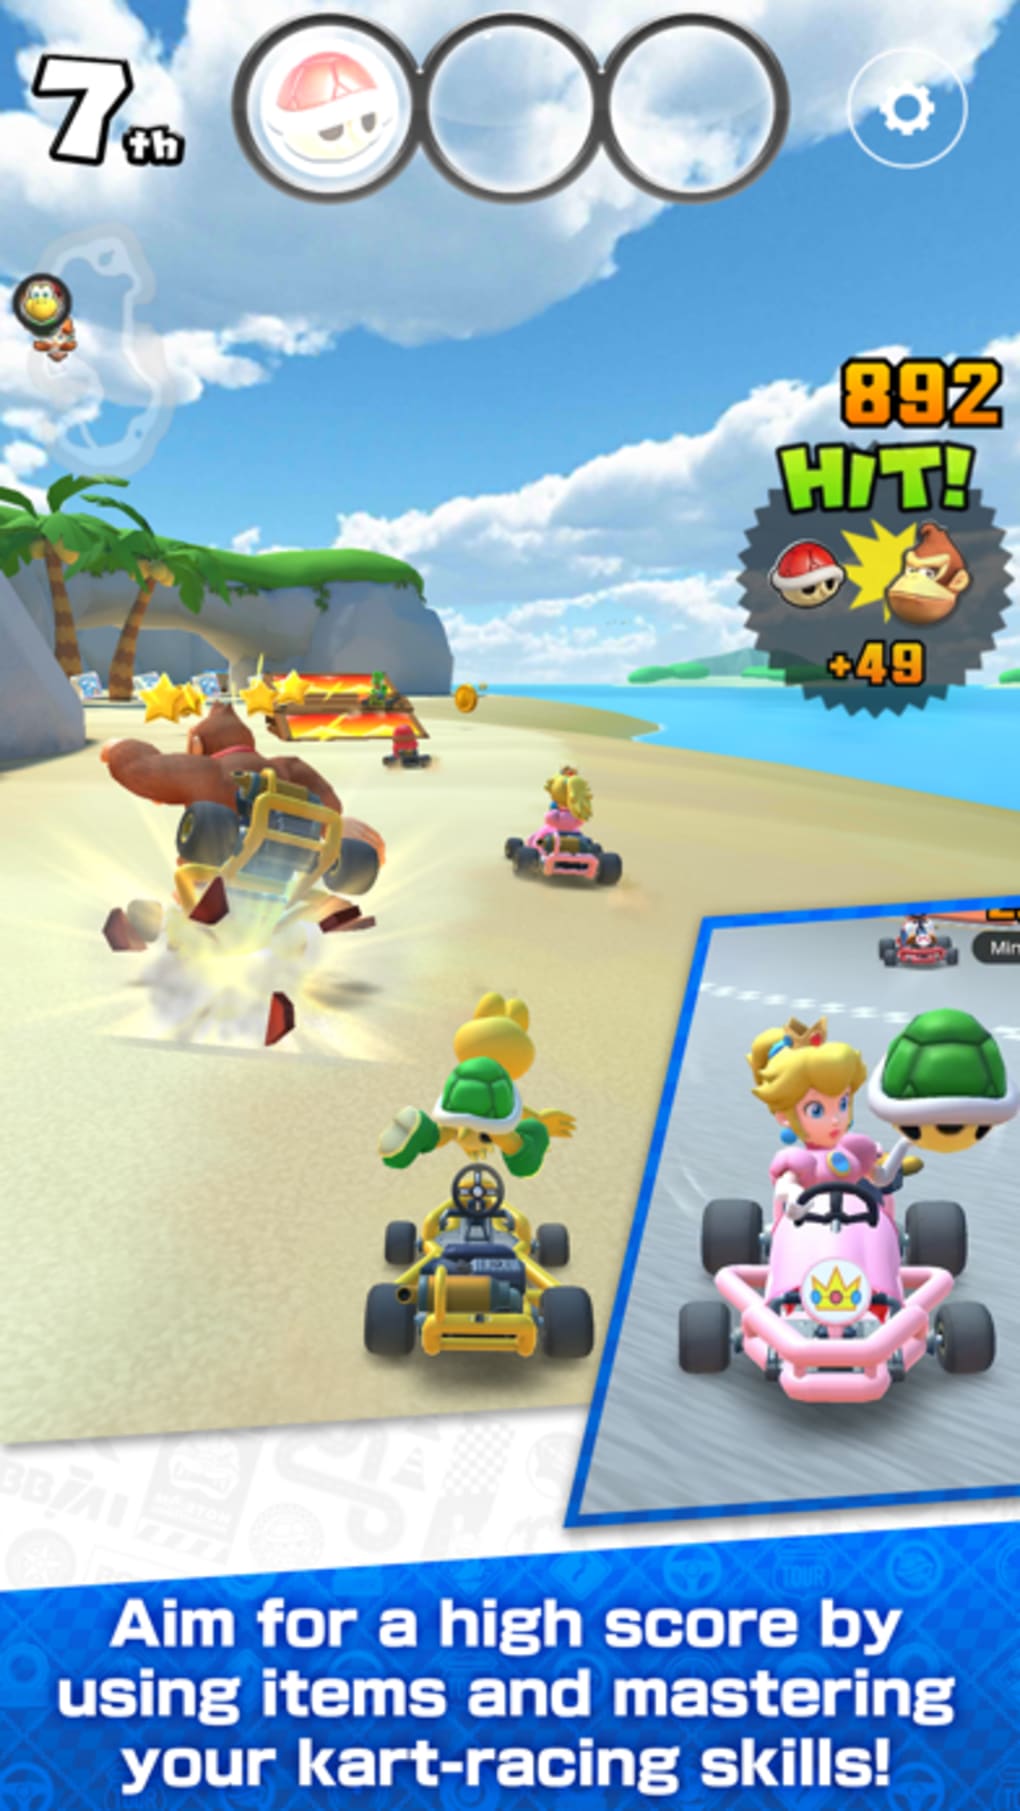 Download Mario Kart Tour latest version for Android free